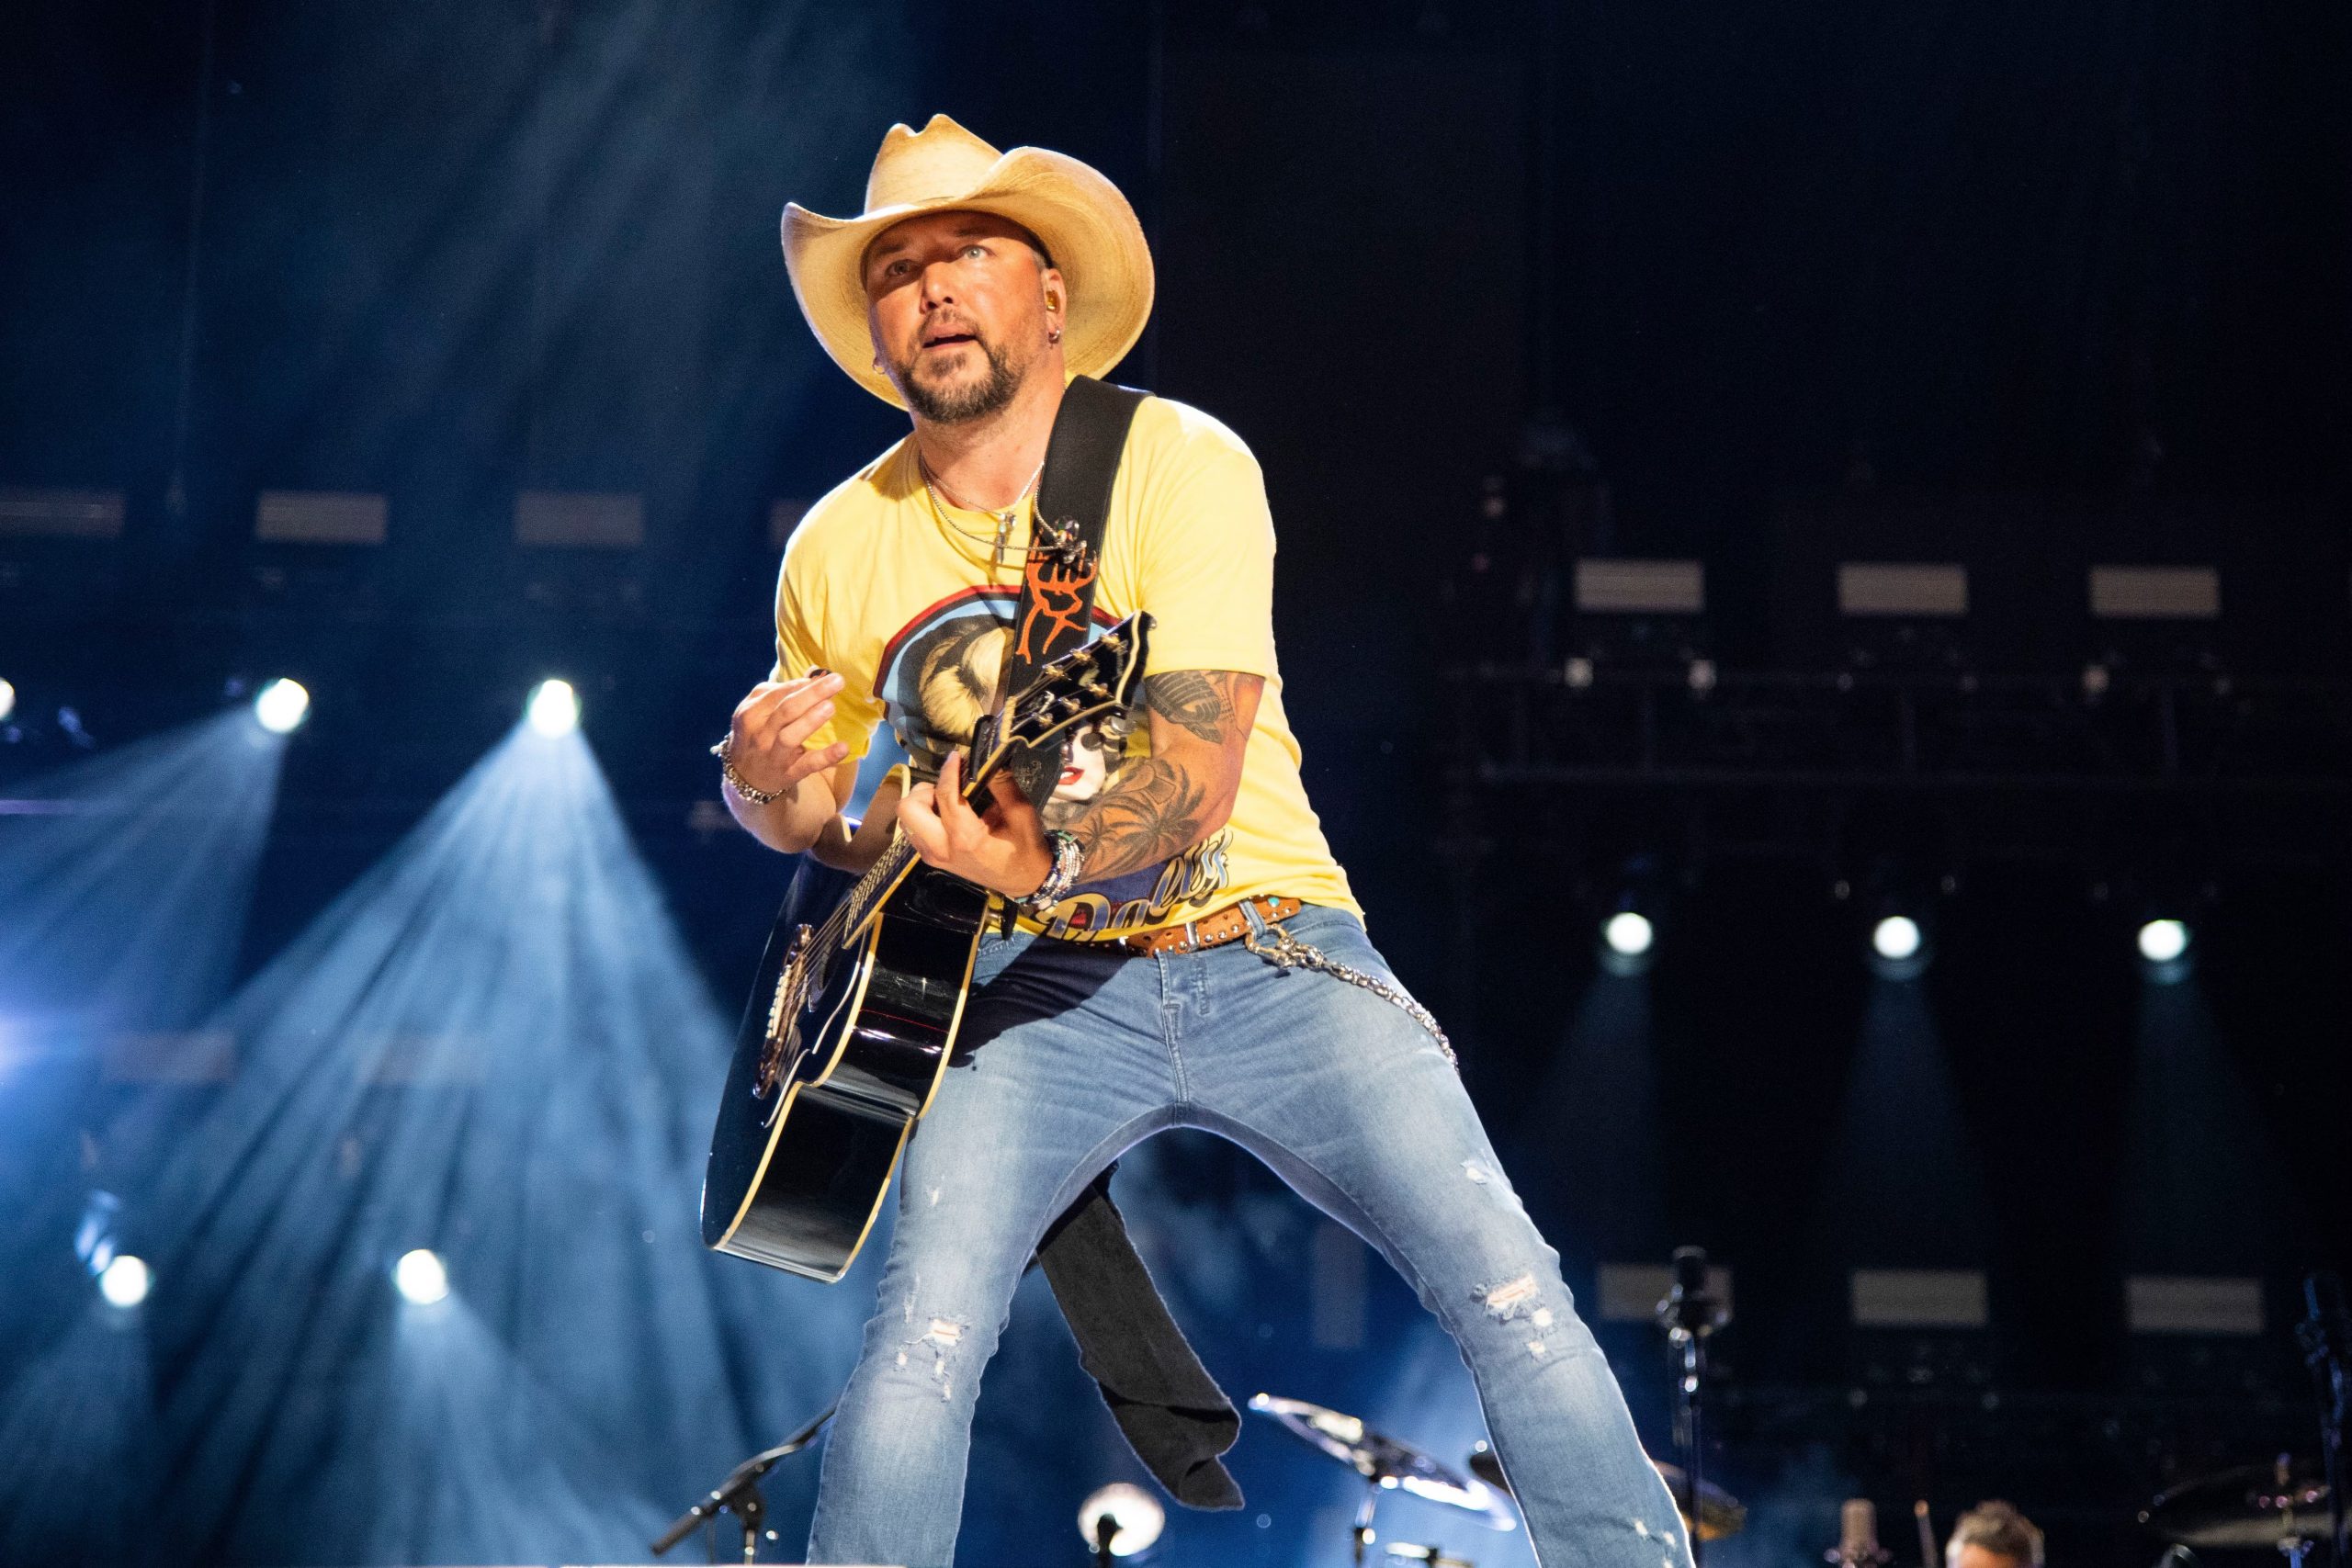 Jason Aldean: US country star denies new music video is 'pro-lynching'